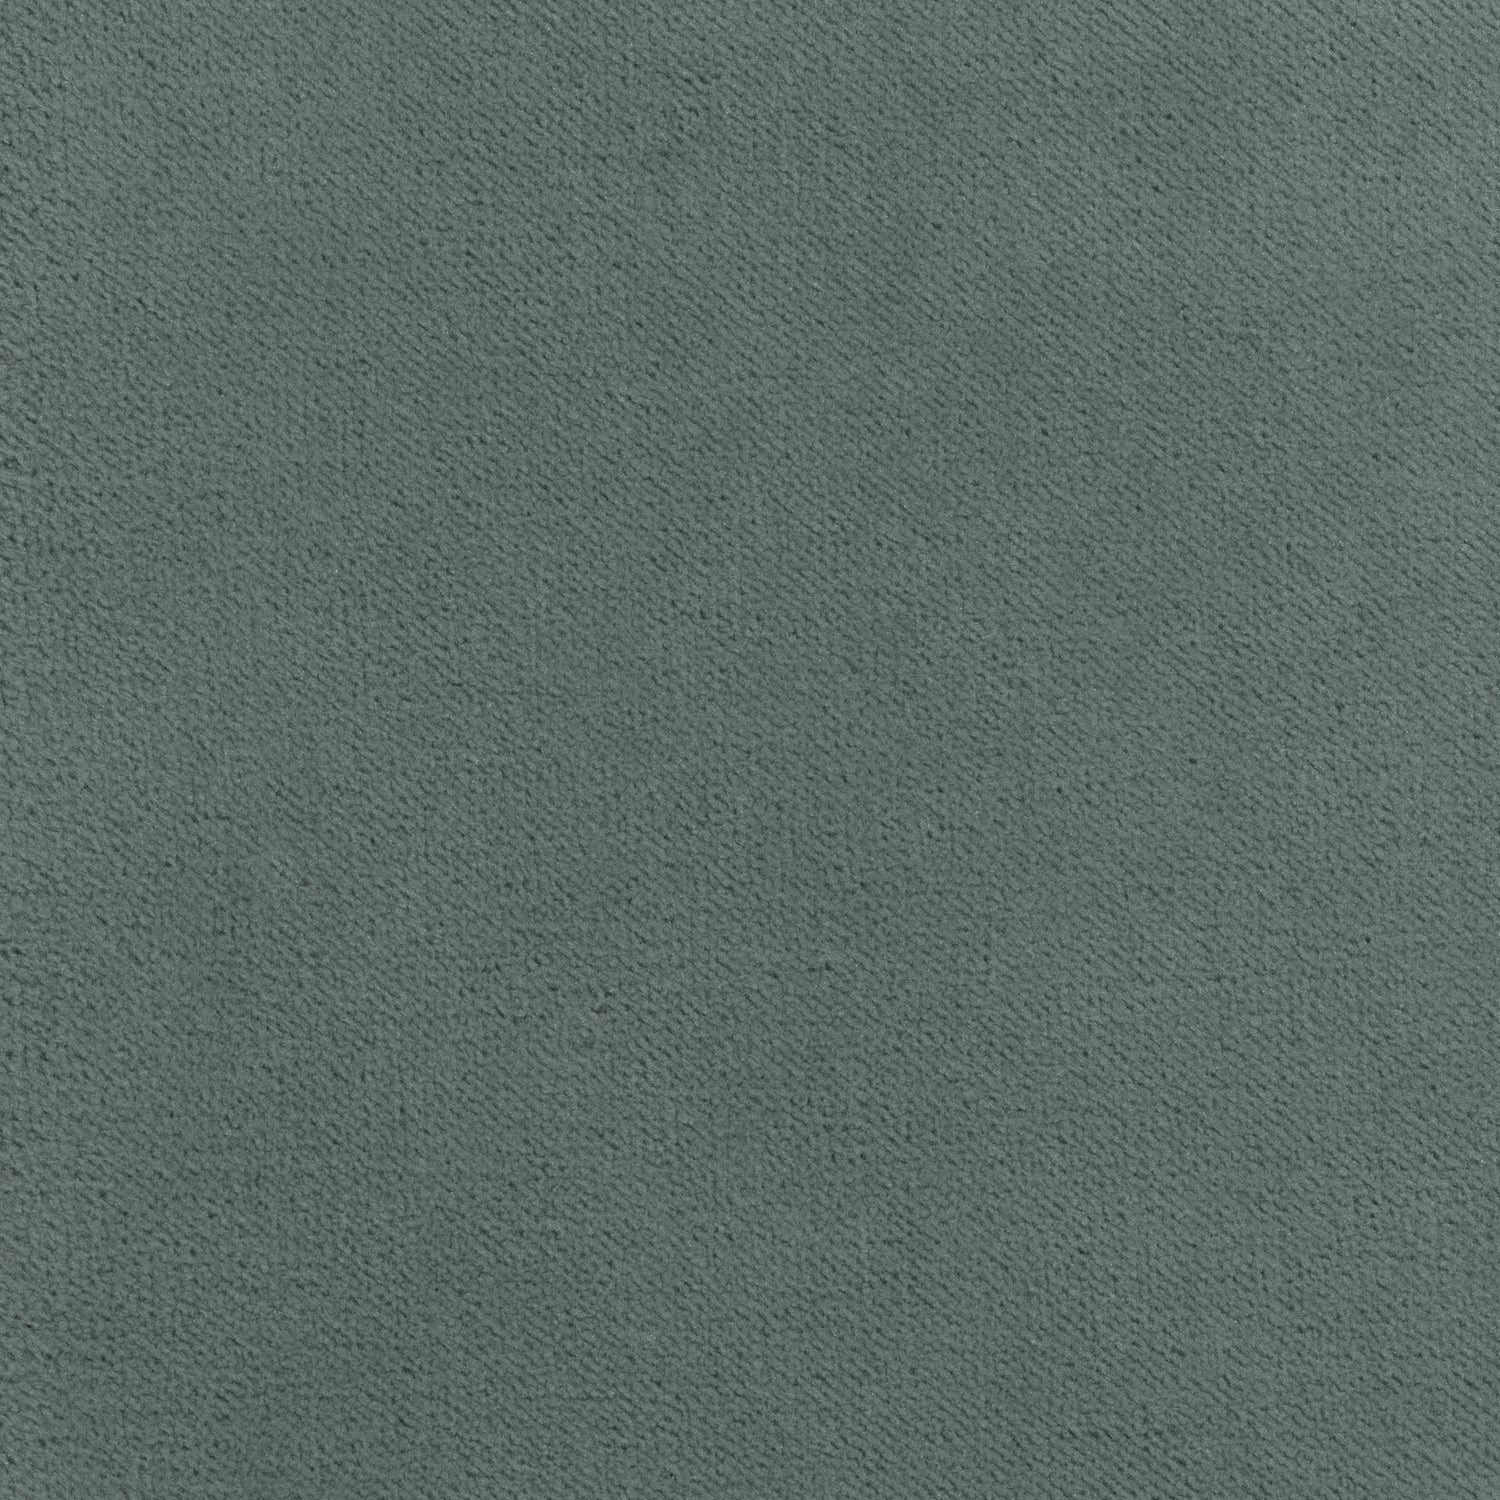 Club Velvet fabric in cloud color - pattern number W7246 - by Thibaut in the Club Velvet collection